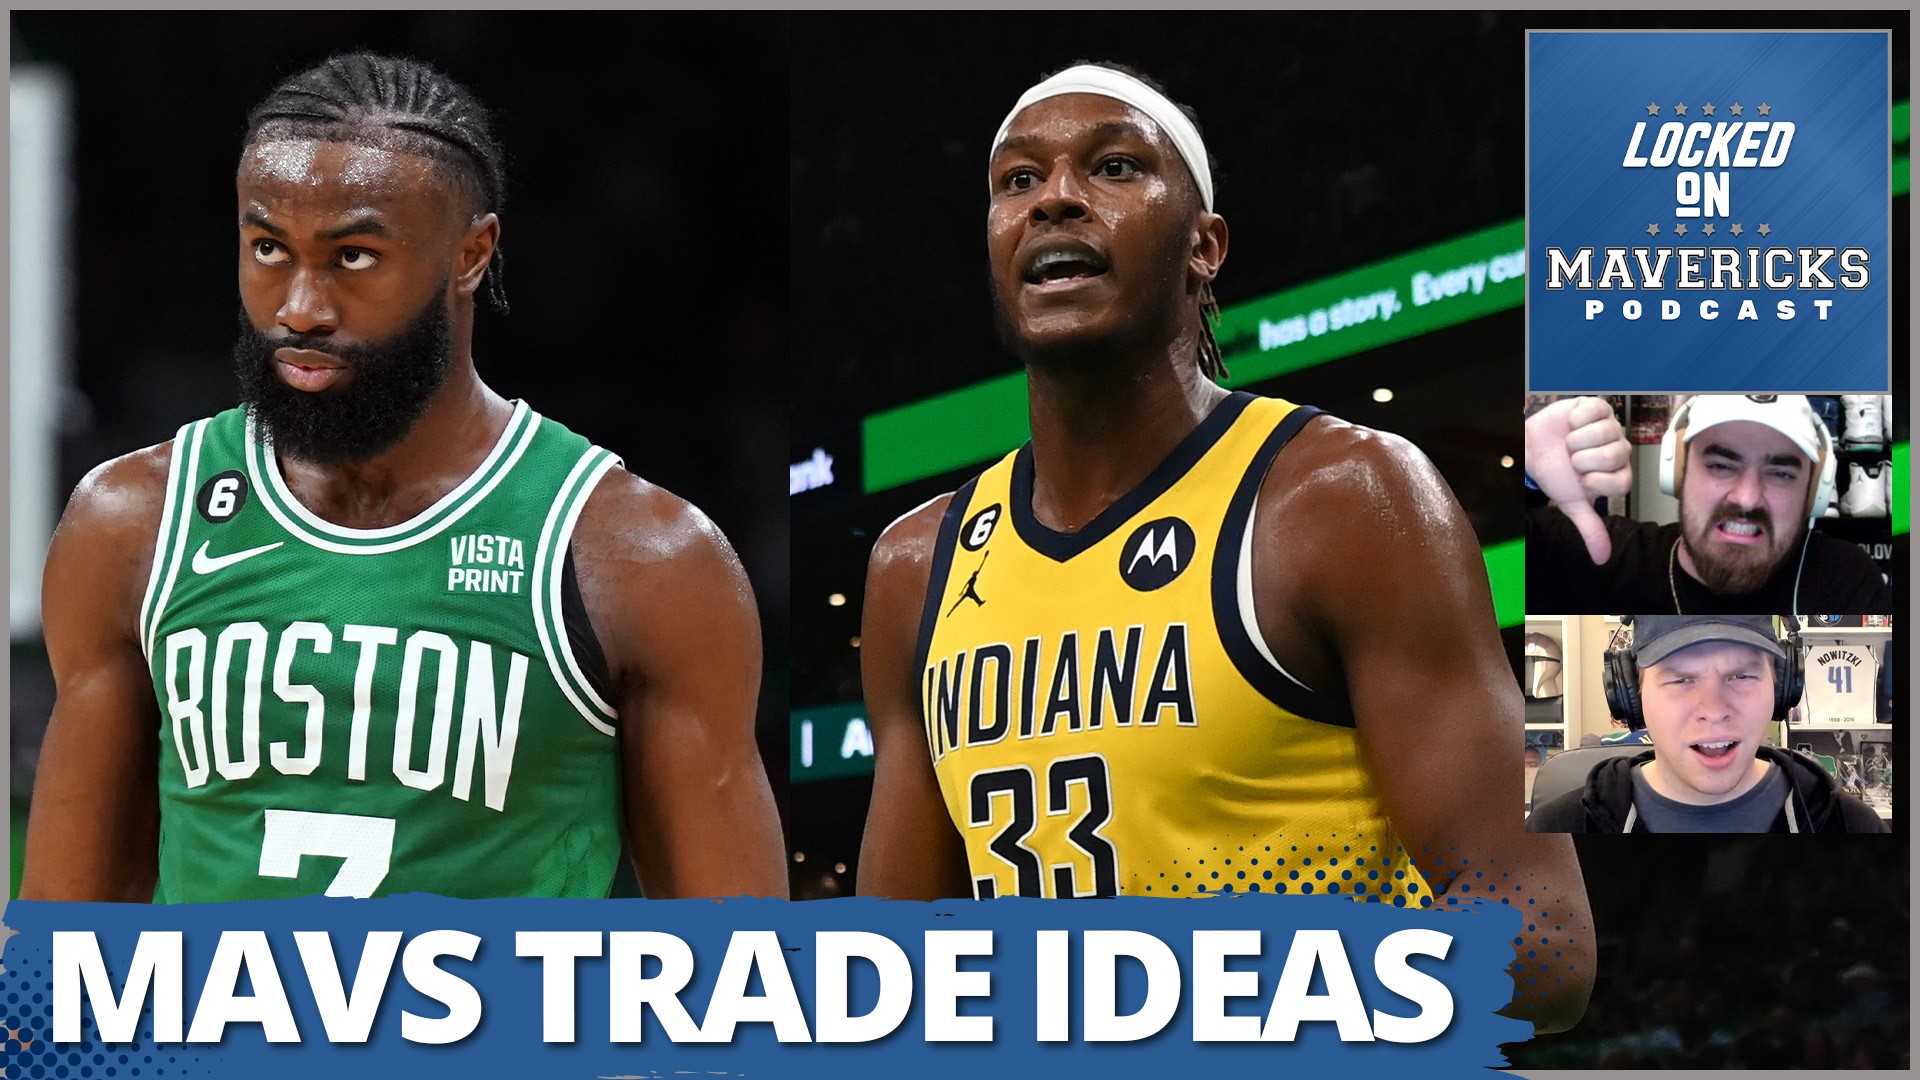 Nick Angstadt & Isaac Harris share some Dallas Mavericks trade ideas to bring in Jaylen Brown, Myles Turner, and more to help Luka Doncic & Kyrie Irving.